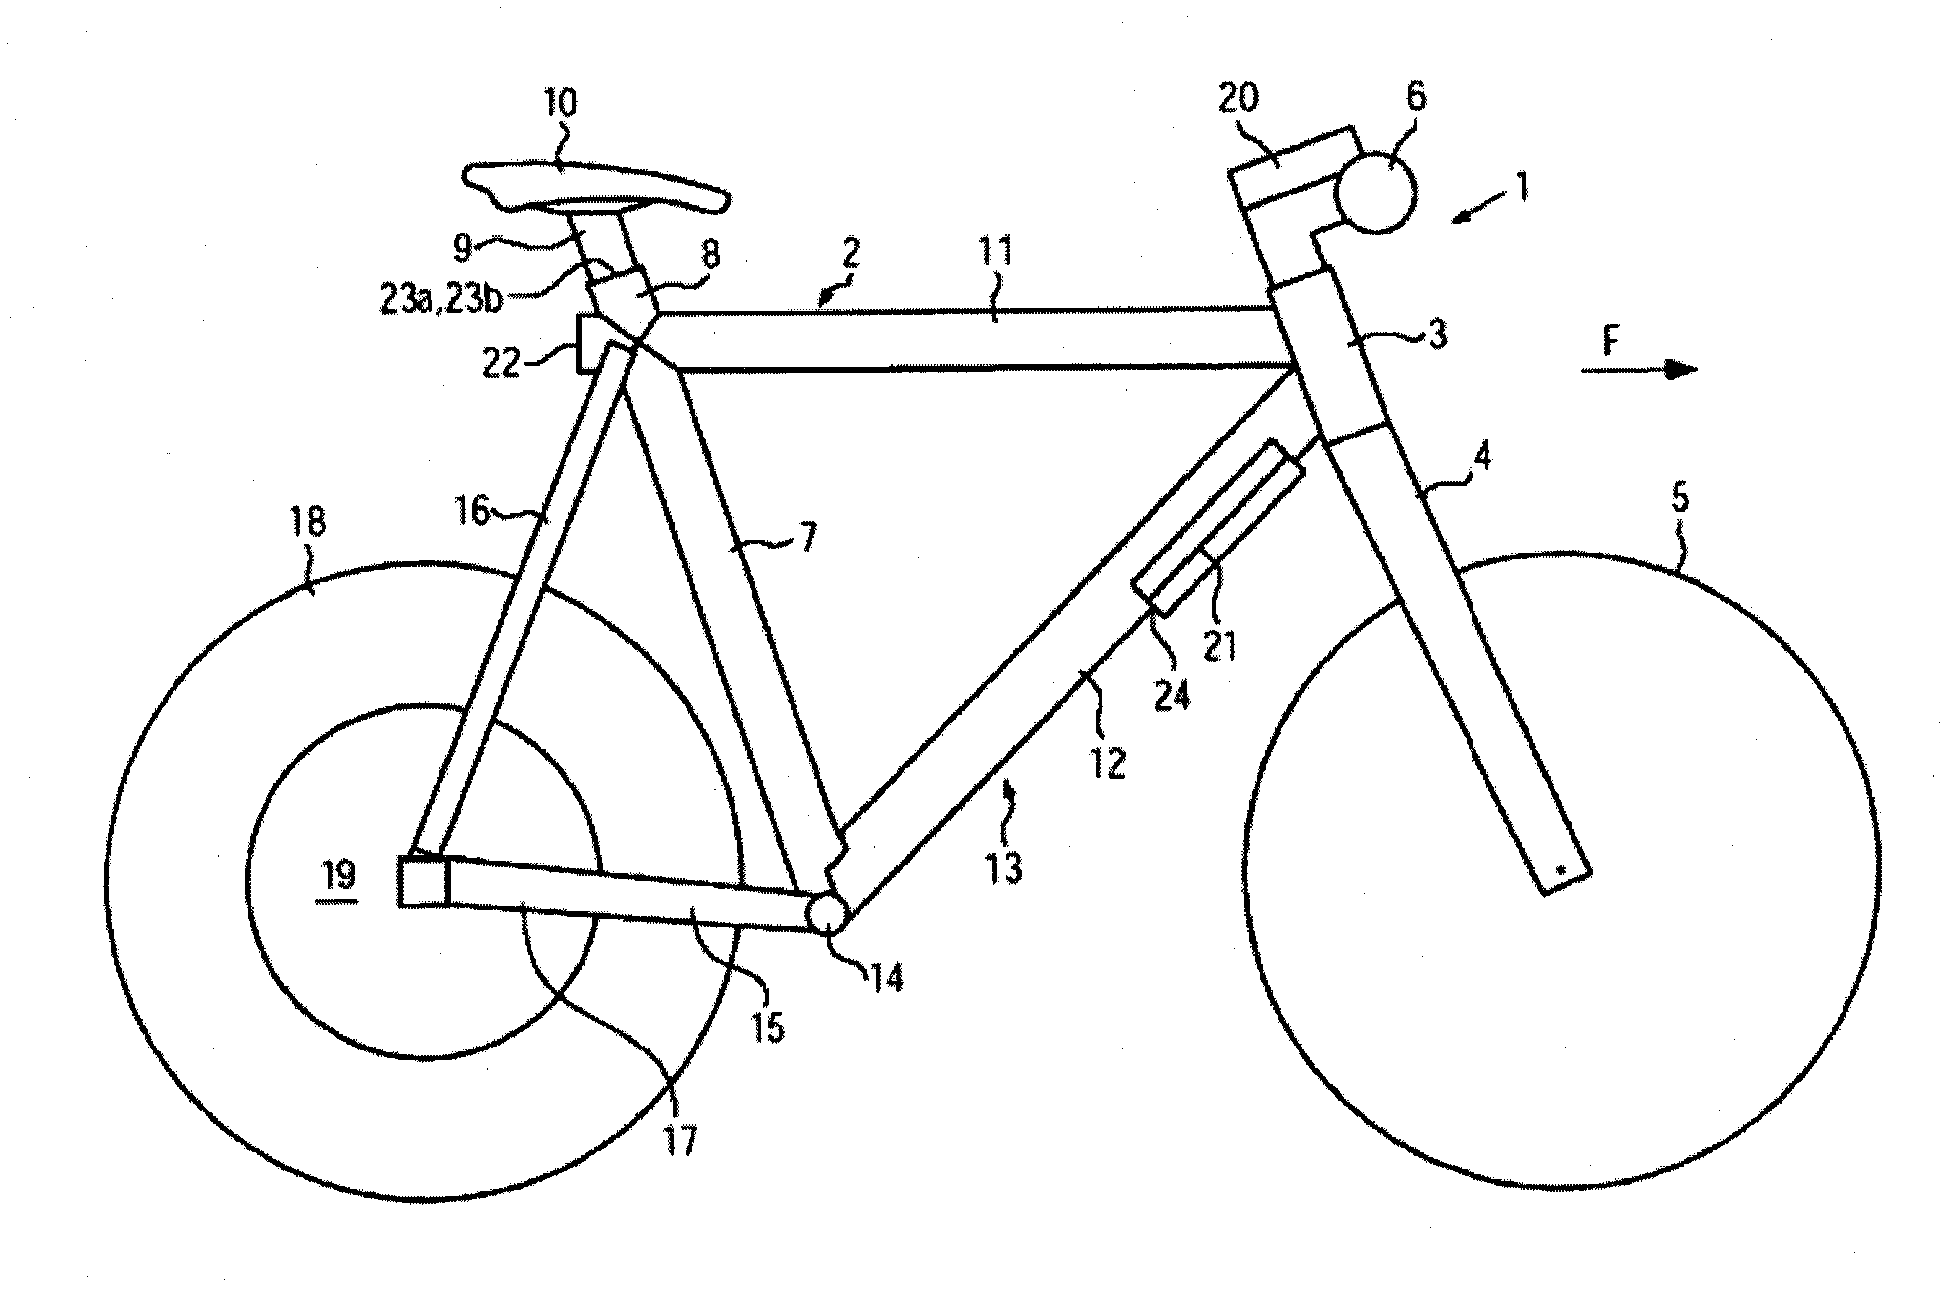 Electric motorcycle with diamond frame and auxiliary pedal drive